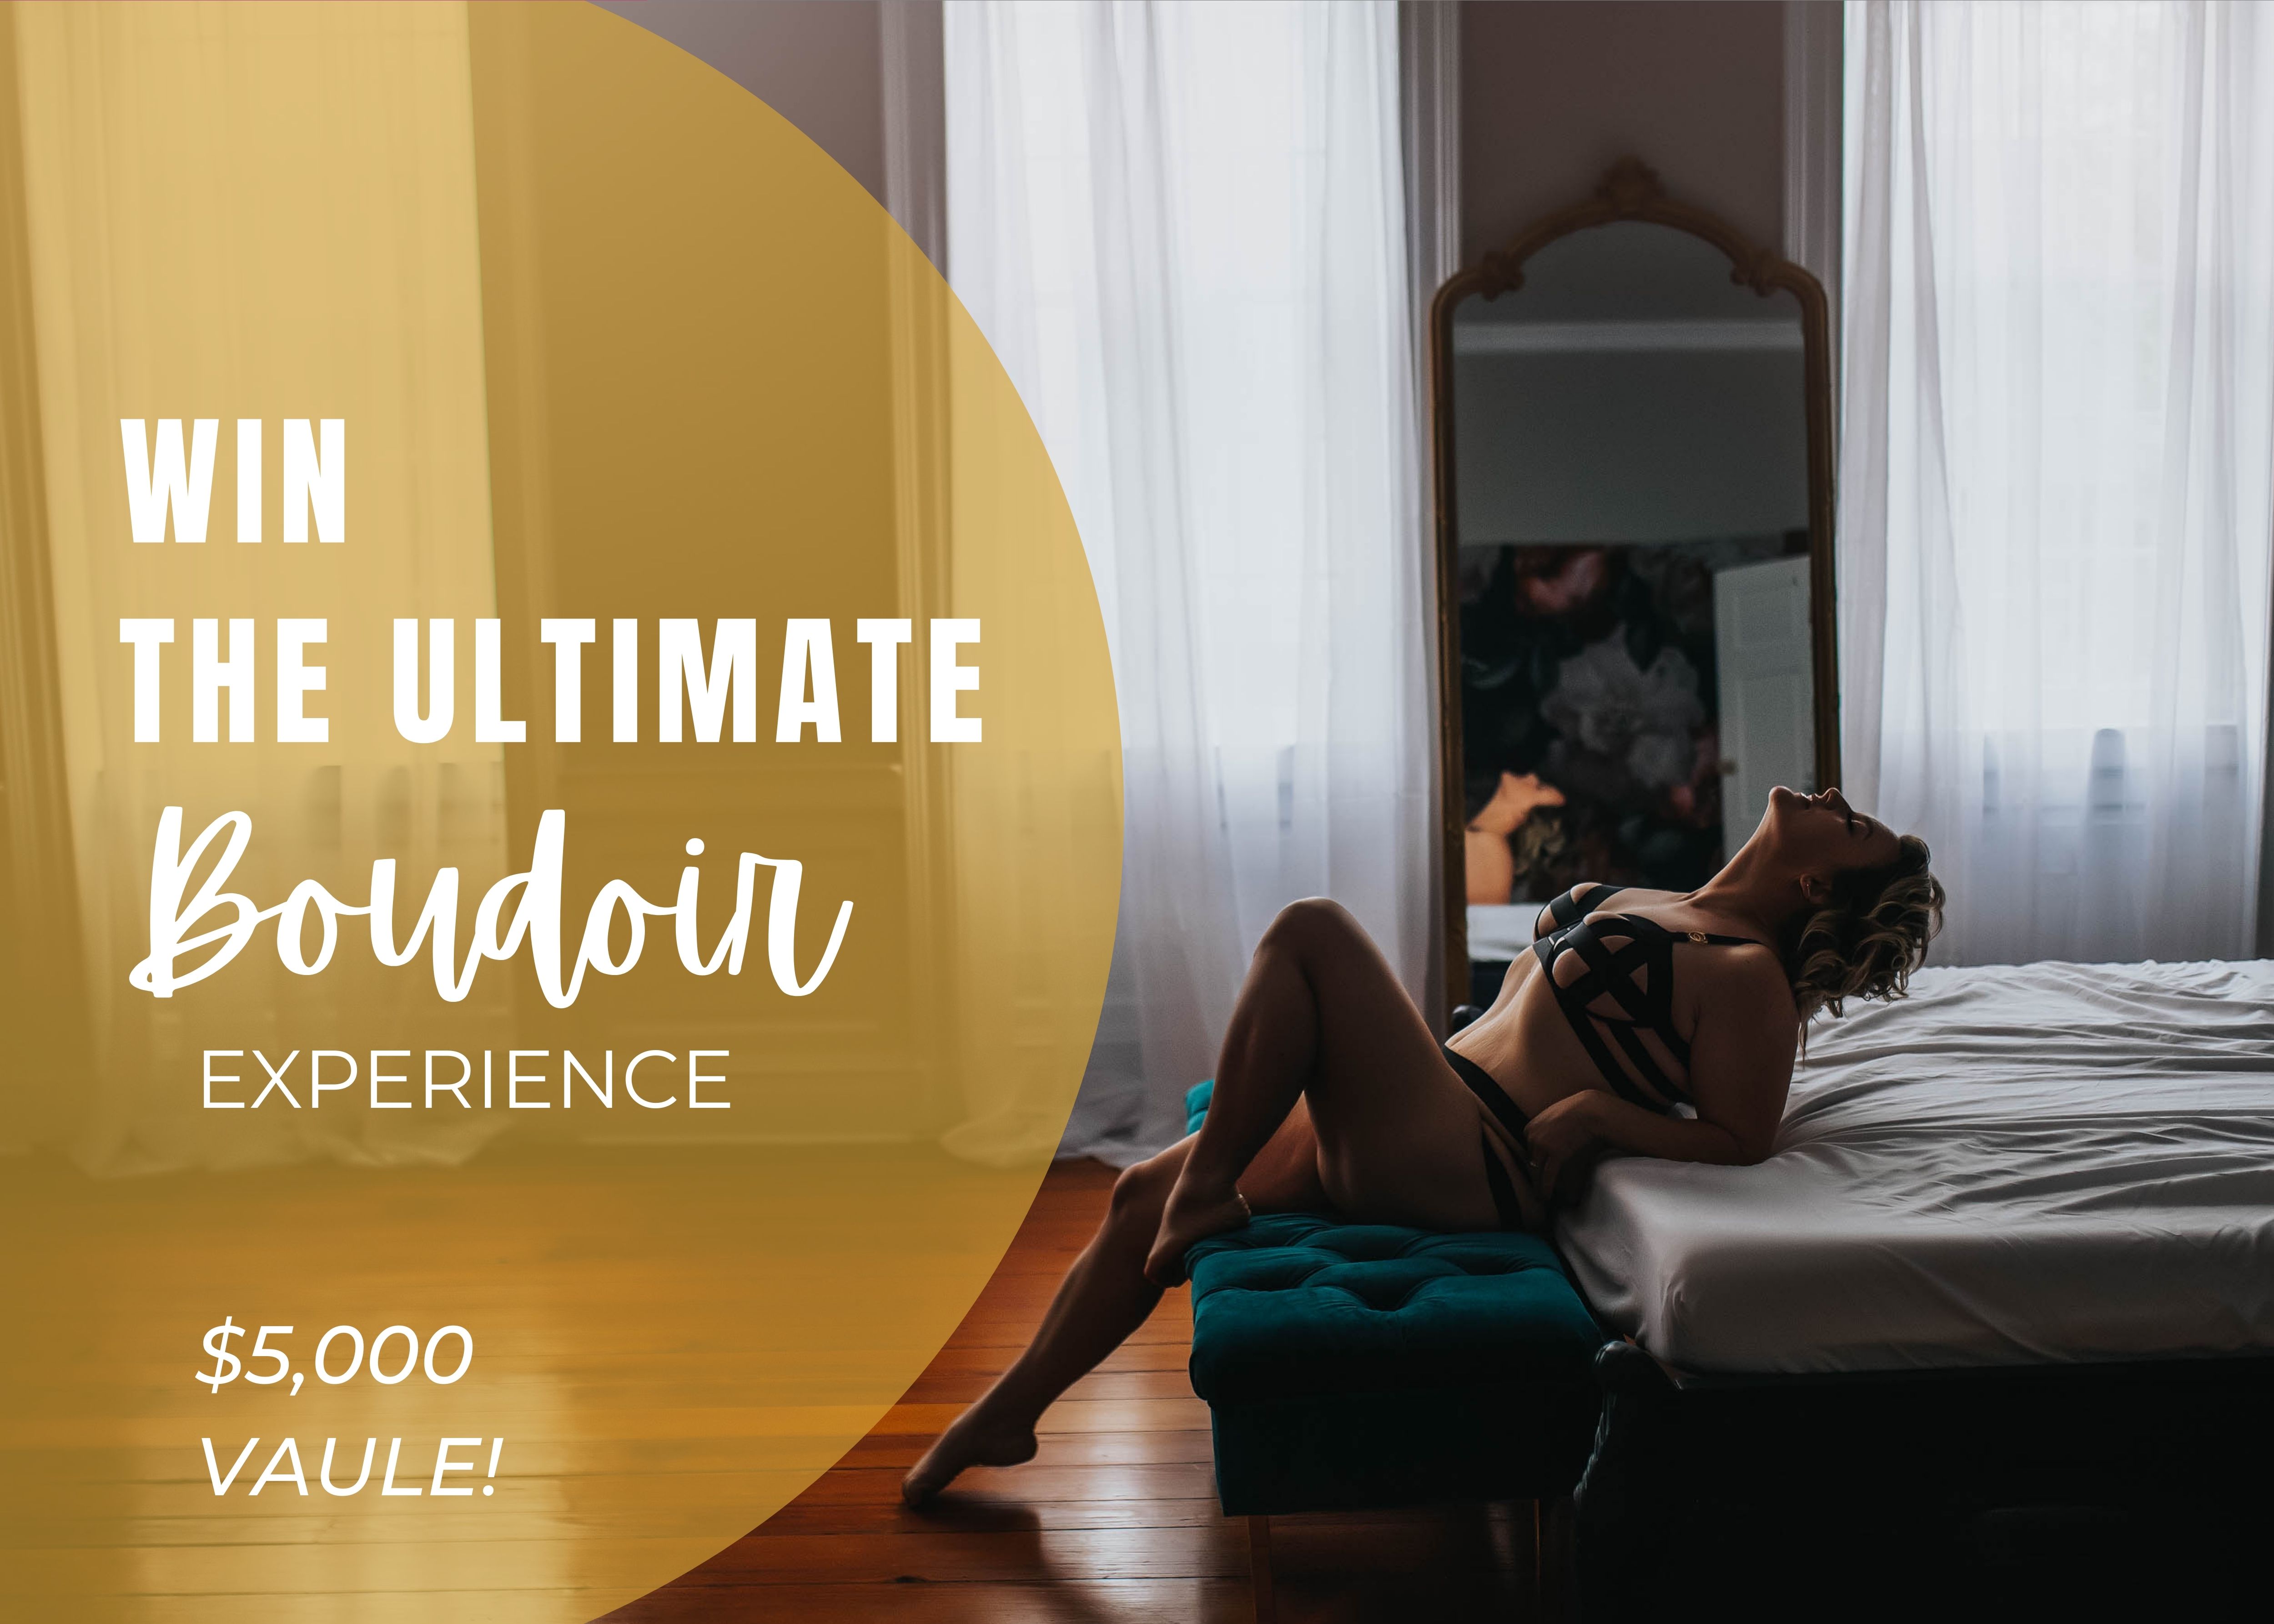 5k giveaway! Win a boudoir experience 